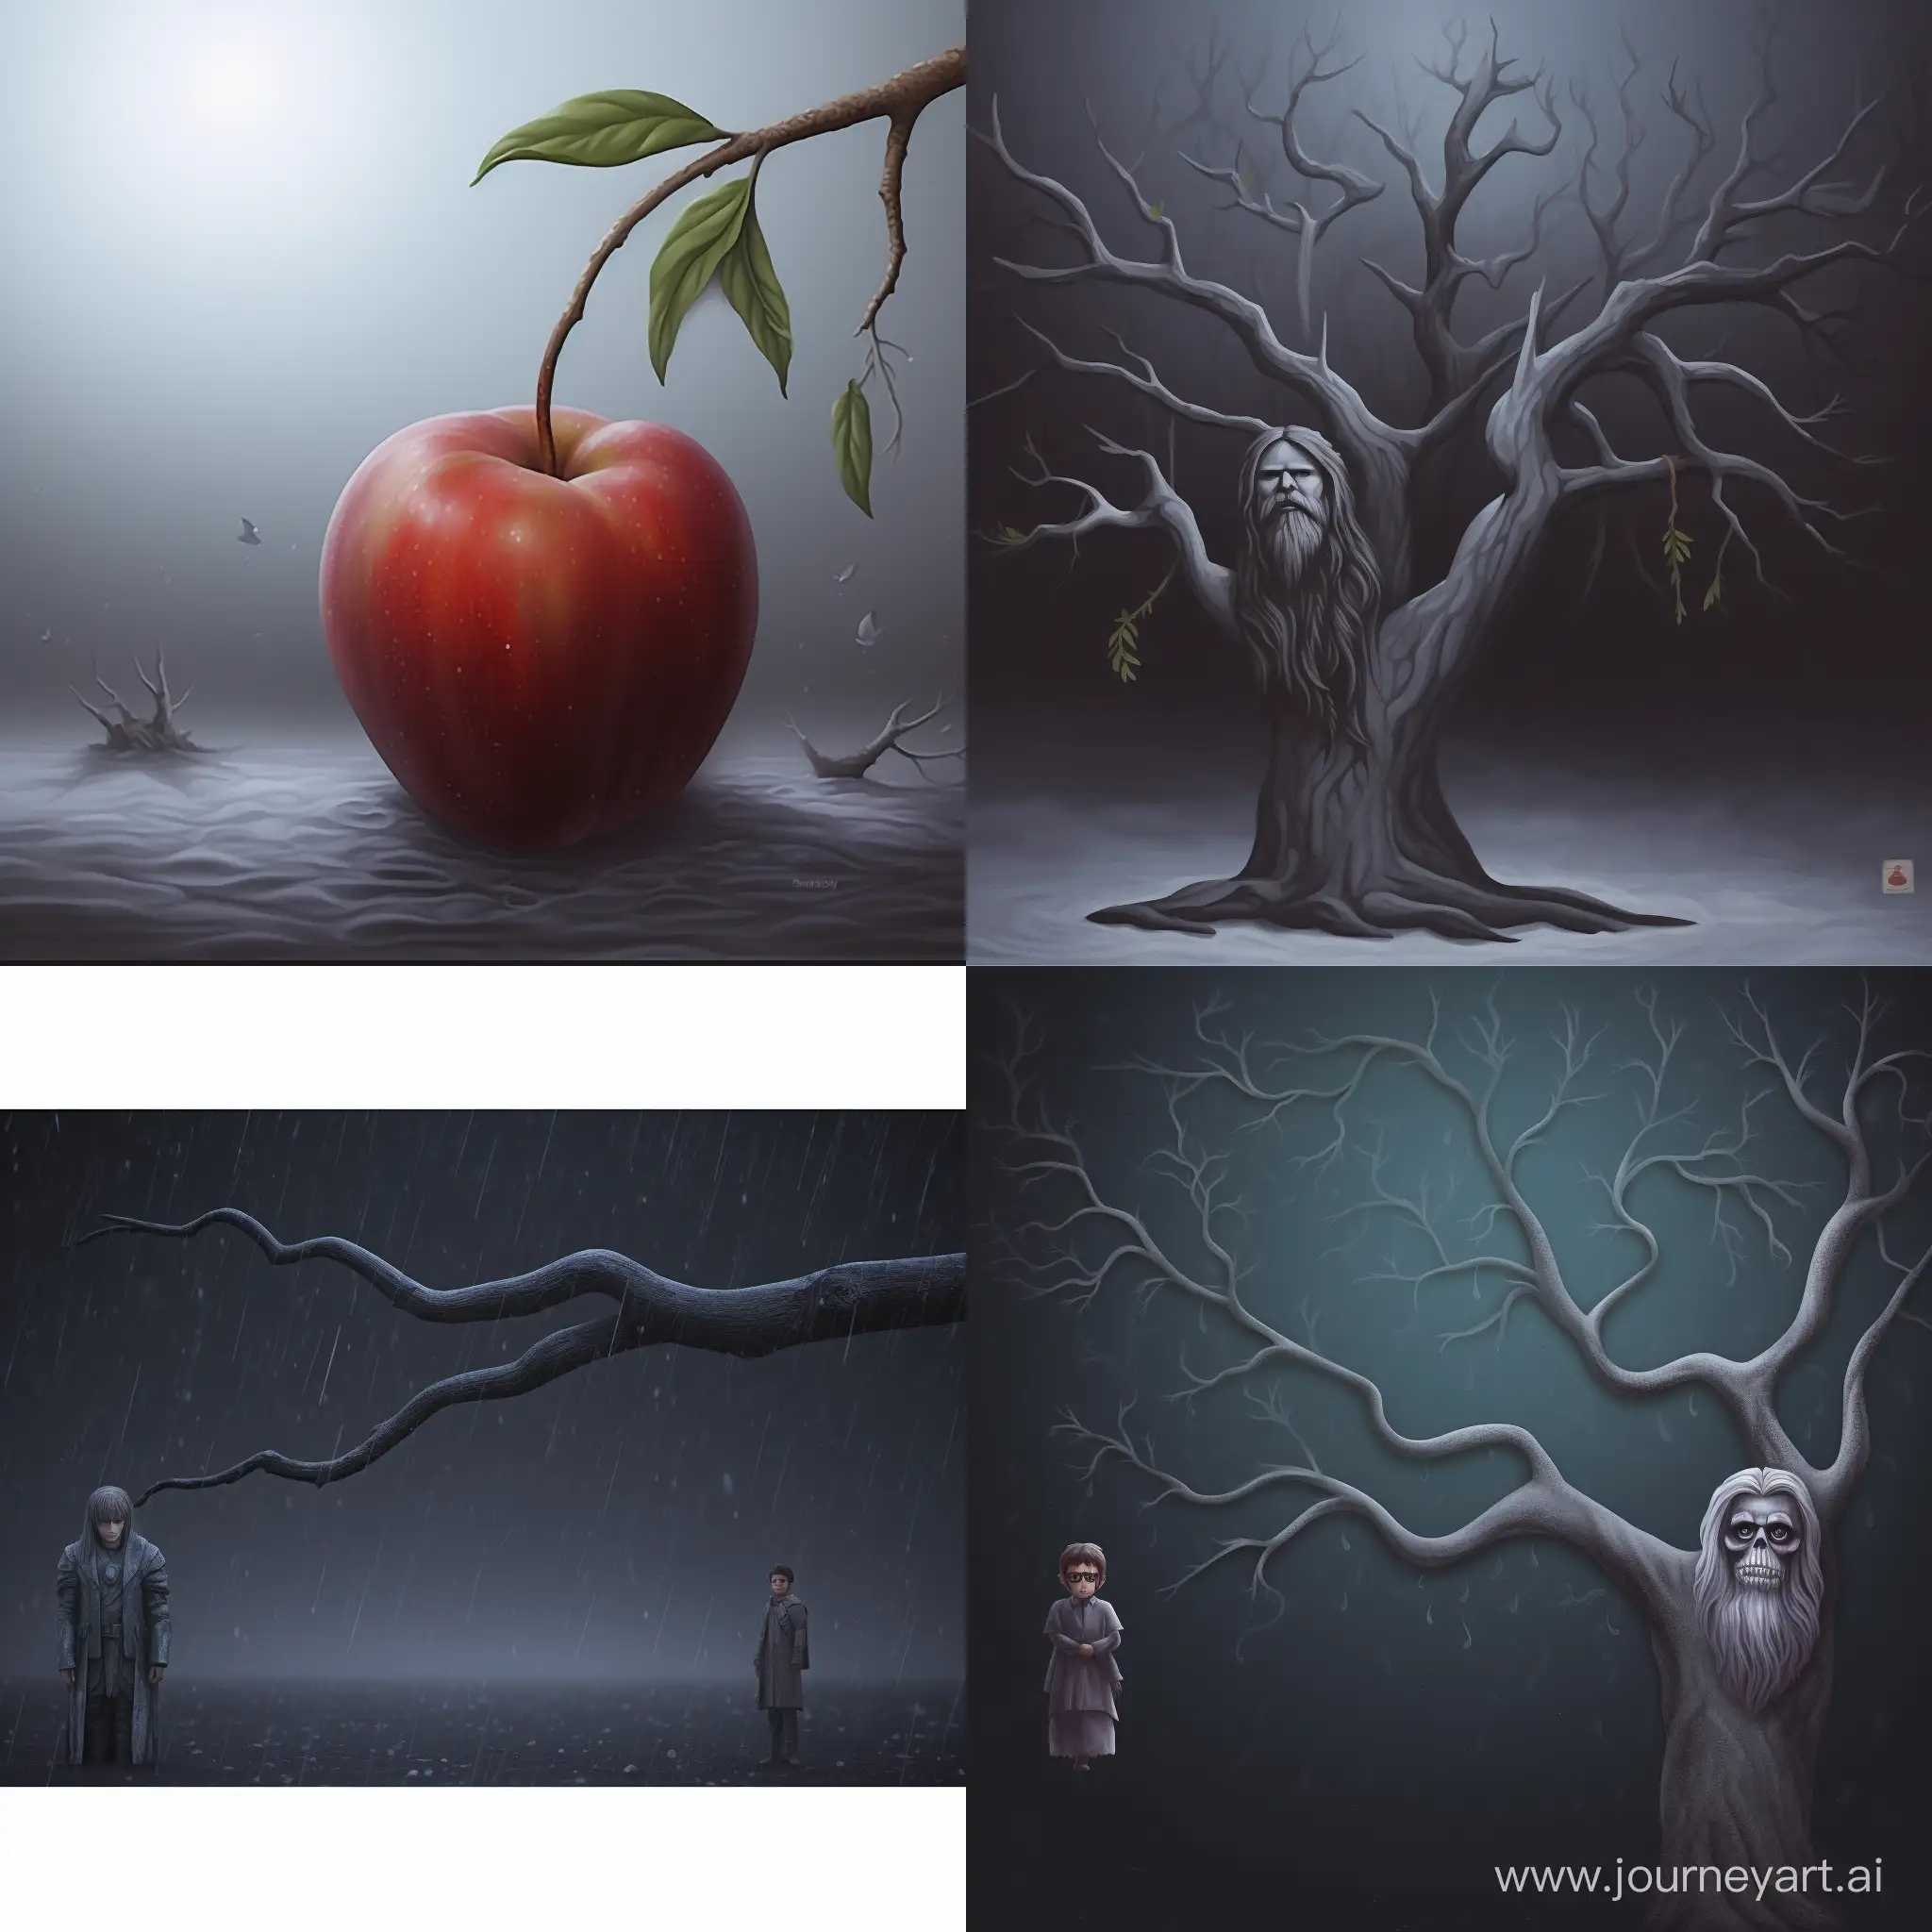 Gloomy-Winter-Night-Scene-with-Melting-Snow-Apple-Tree-and-Mysterious-Figures